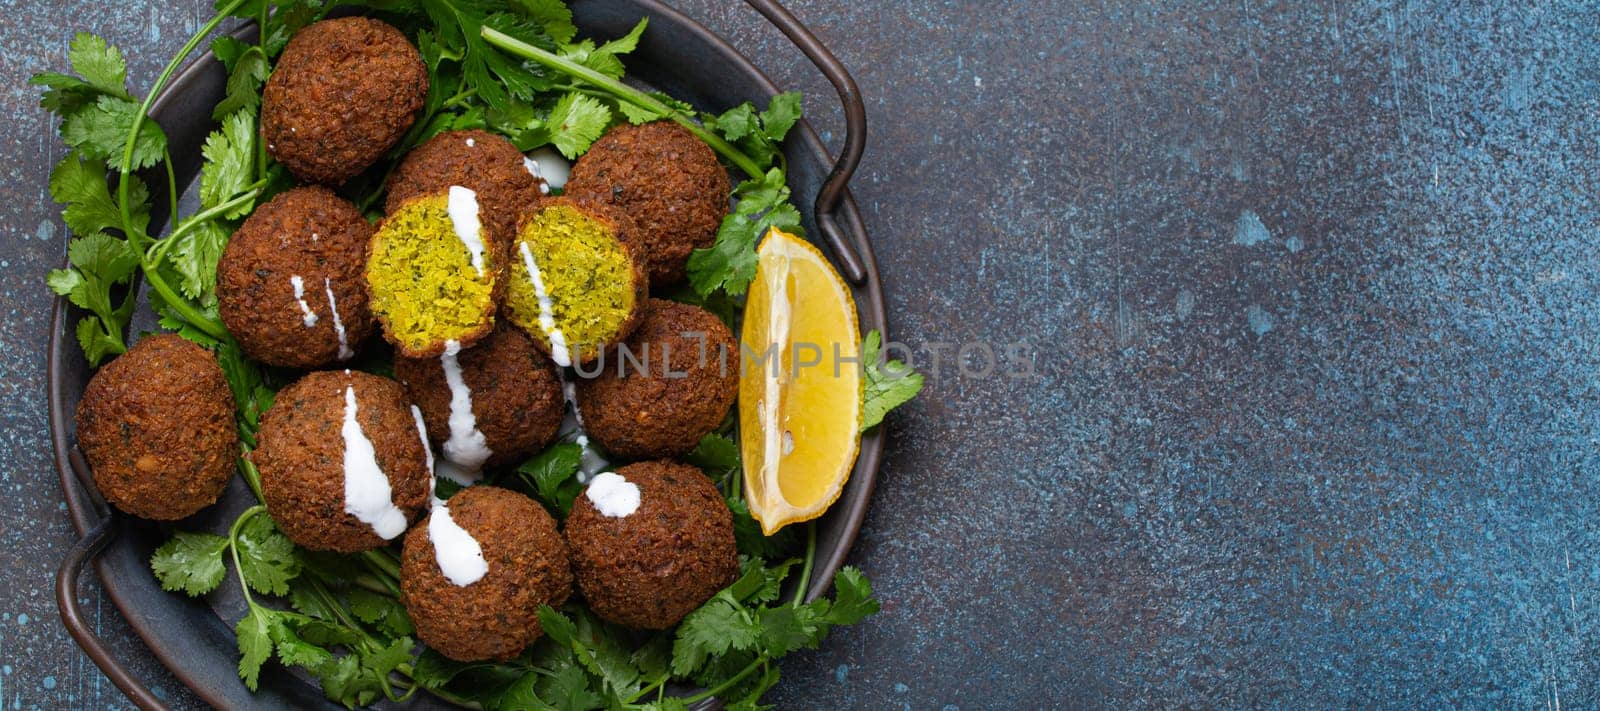 Plate of fried falafel balls served with fresh green cilantro and lemon top view on rustic concrete background. Traditional vegan dish of Middle Eastern cuisine, copy space by its_al_dente